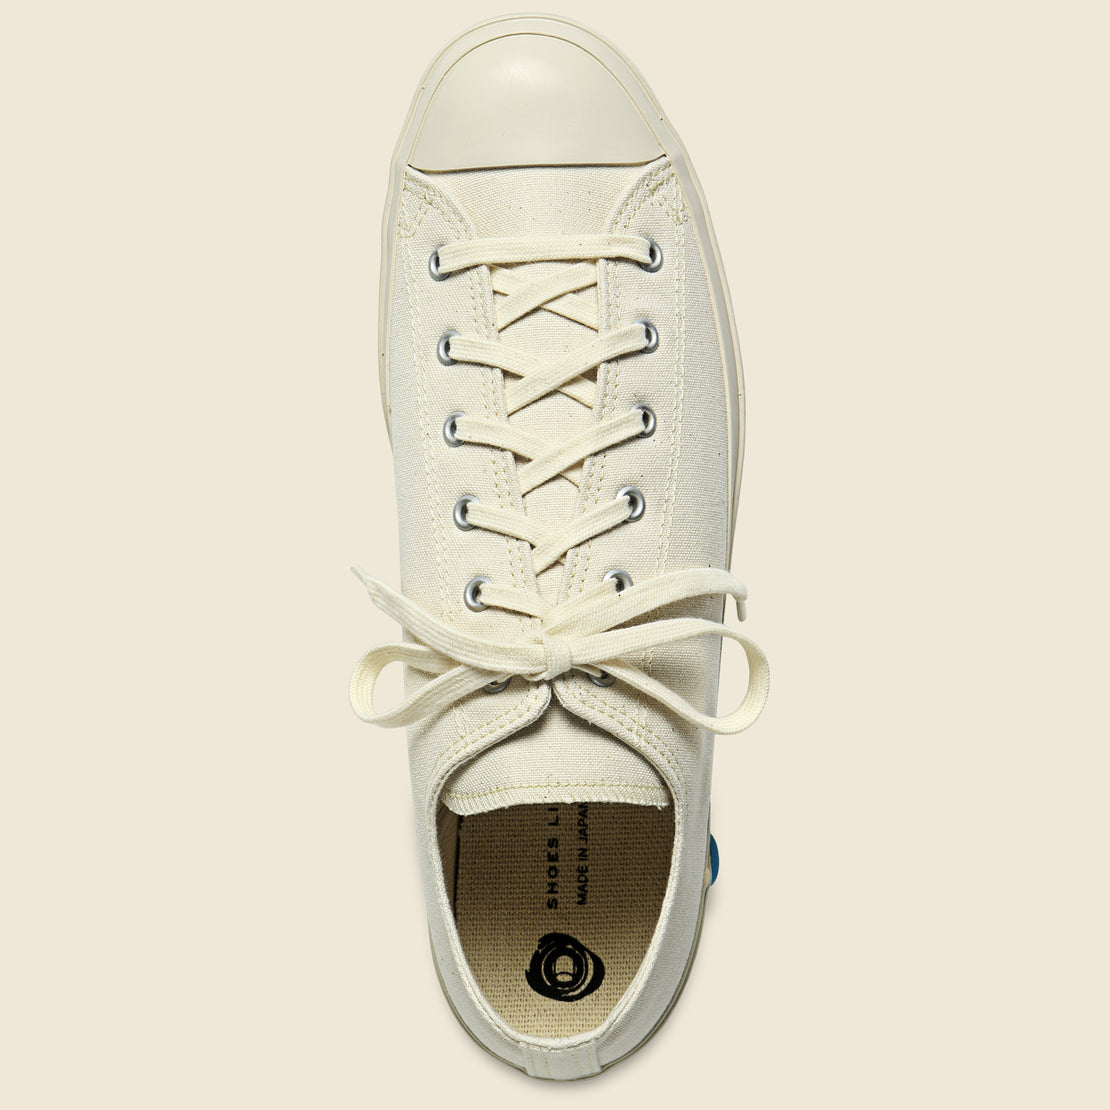 01-JP Lo Sneaker - White - Shoes Like Pottery - STAG Provisions - Shoes - Athletic